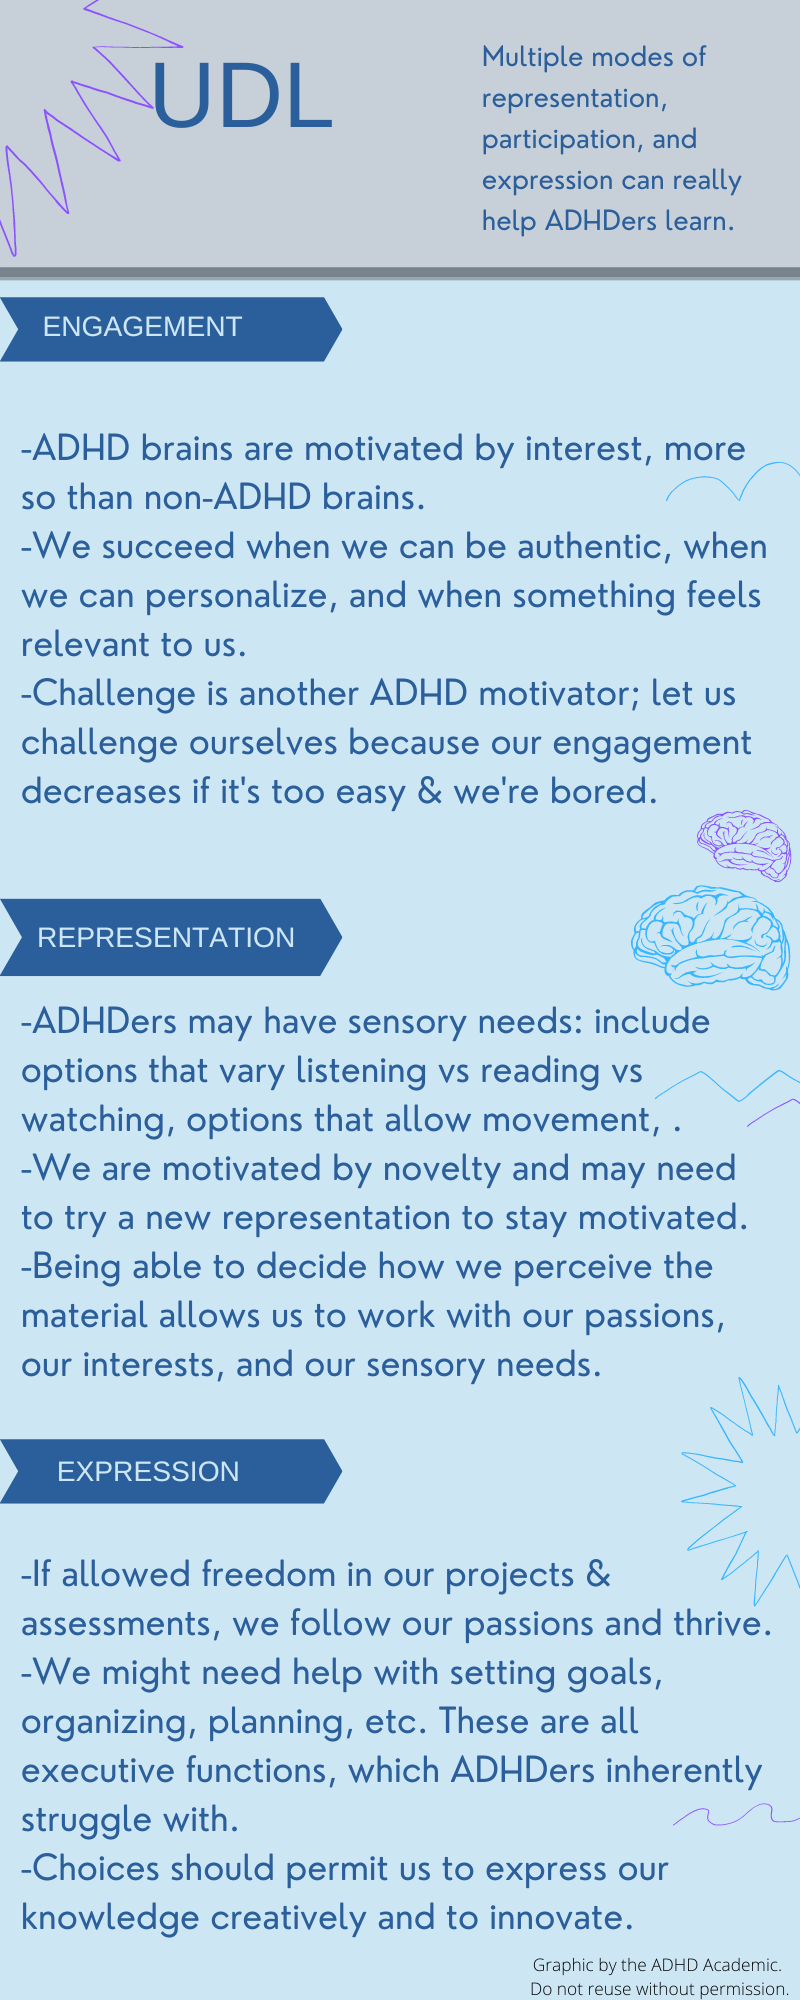 UDL.  Multiple modes of representation, participation, and expression can really help ADHDers learn. Engagement: -ADHD brains are motivated by interest, more so than non-ADHD brains.  -We succeed when we can be authentic, when we can personalize, and when something feels relevant to us. -Challenge is another ADHD motivator; let us challenge ourselves because our engagement decreases if it's too easy & we're bored. Representation: -ADHDers may have sensory needs: include options that vary listening vs reading vs watching, options that allow movement, .  -We are motivated by novelty and may need to try a new representation to stay motivated. -Being able to decide how we perceive the material allows us to work with our passions, our interests, and our sensory needs. Expression: -If allowed freedom in our projects & assessments, we follow our passions and thrive. -We might need help with setting goals, organizing, planning, etc. These are all executive functions, which ADHDers inherently struggle with. -Choices should permit us to express our knowledge creatively and to innovate.Graphic by the ADHD Academic.  Do not reuse without permission.